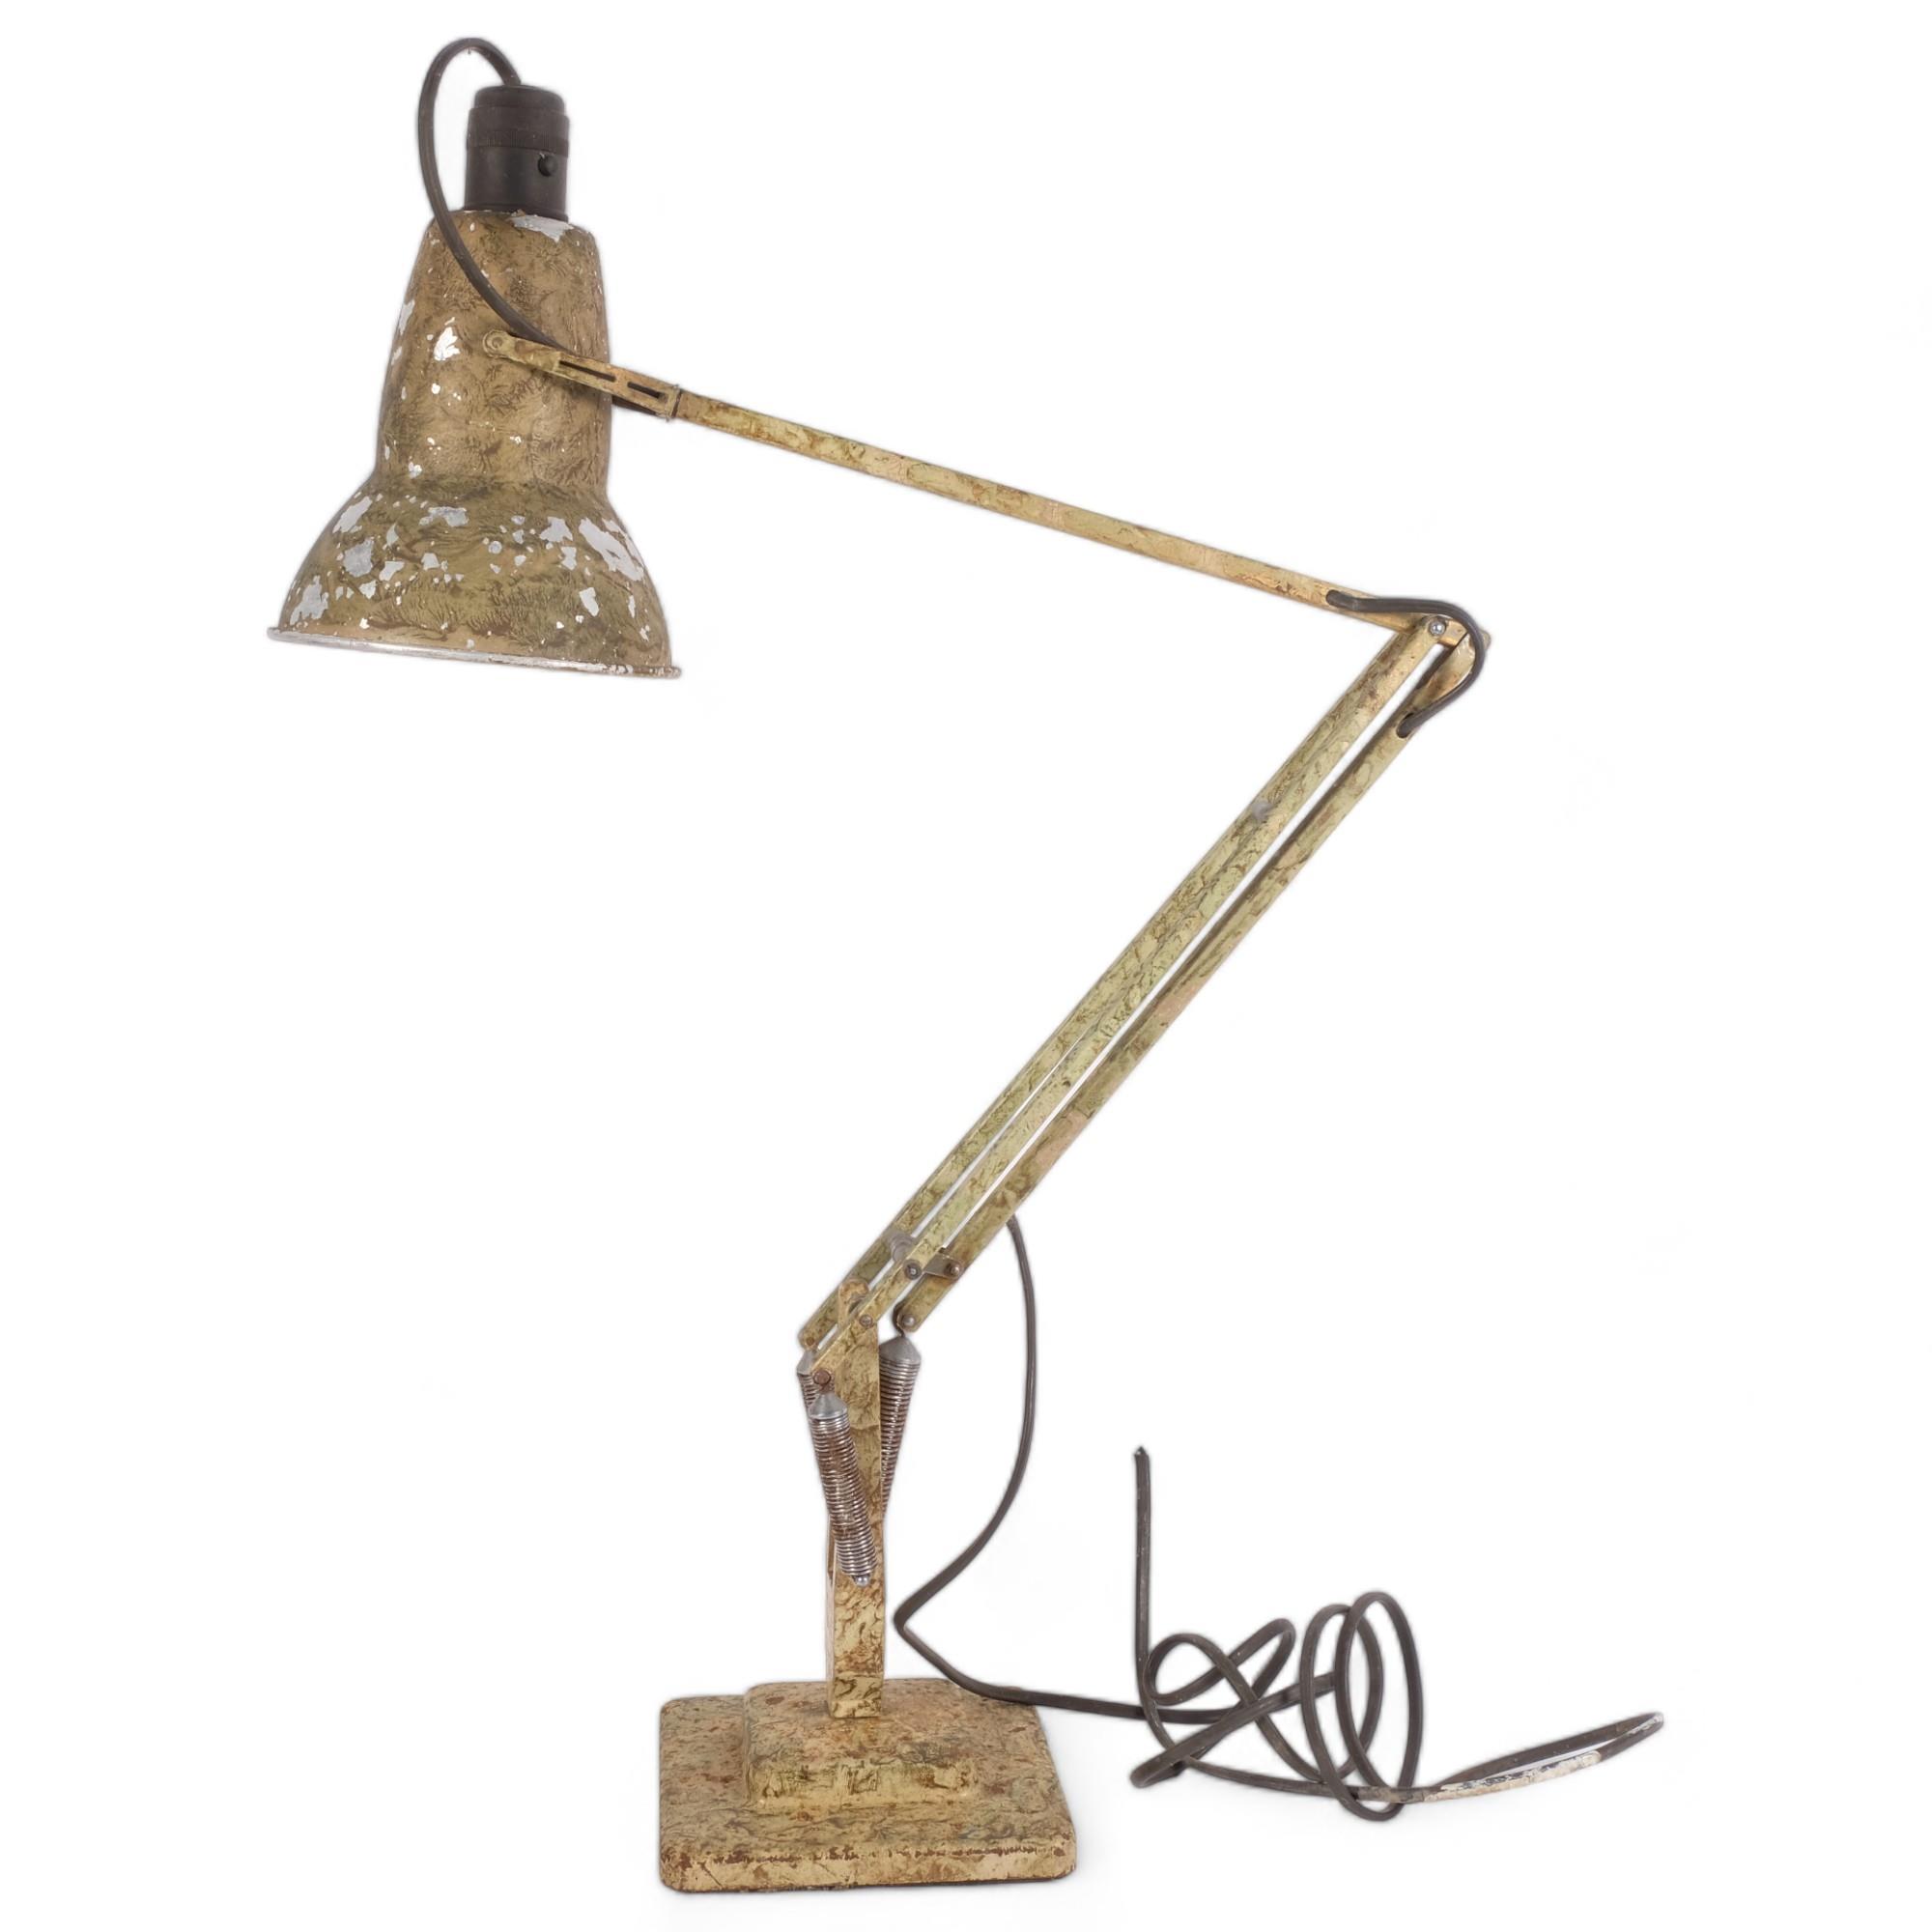 A Vintage painted Herbert Terry anglepoise desk lamp